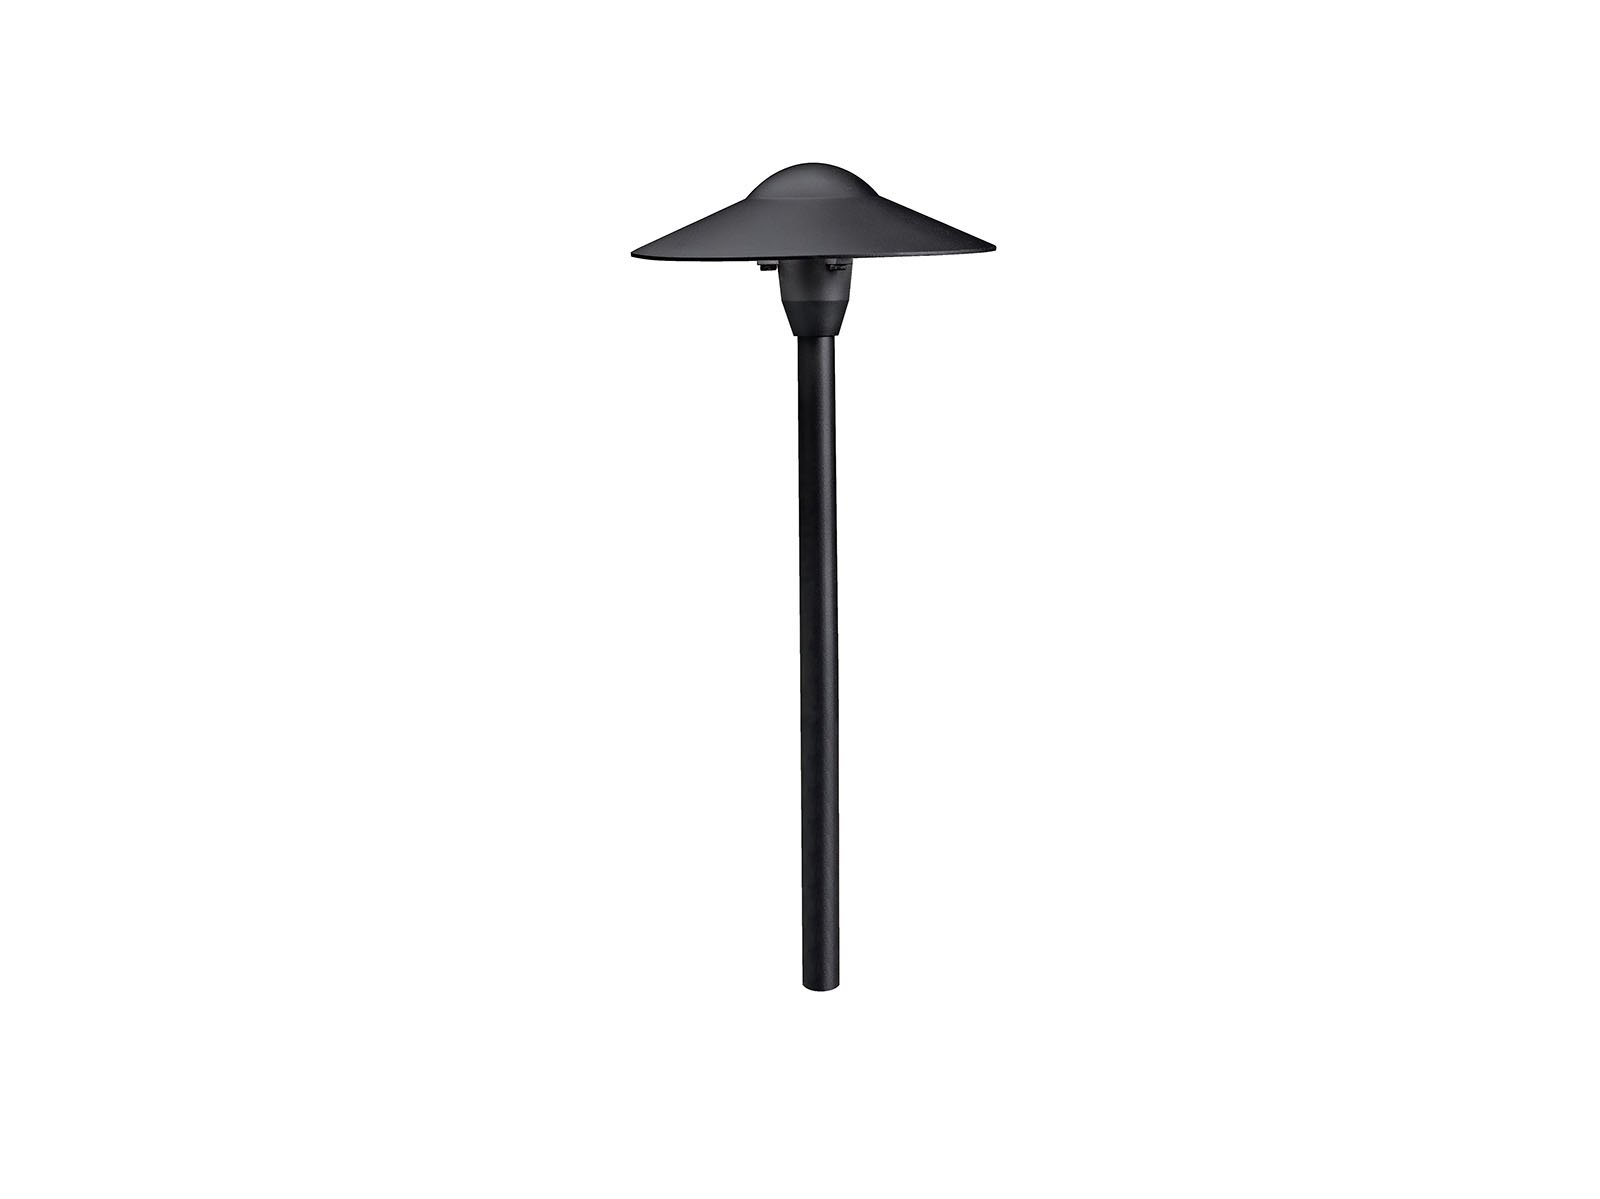 DOME PATH LIGHT - A wider path and spread light that is unobtrusive in the landscape. Coordinates with other Dome path lights.